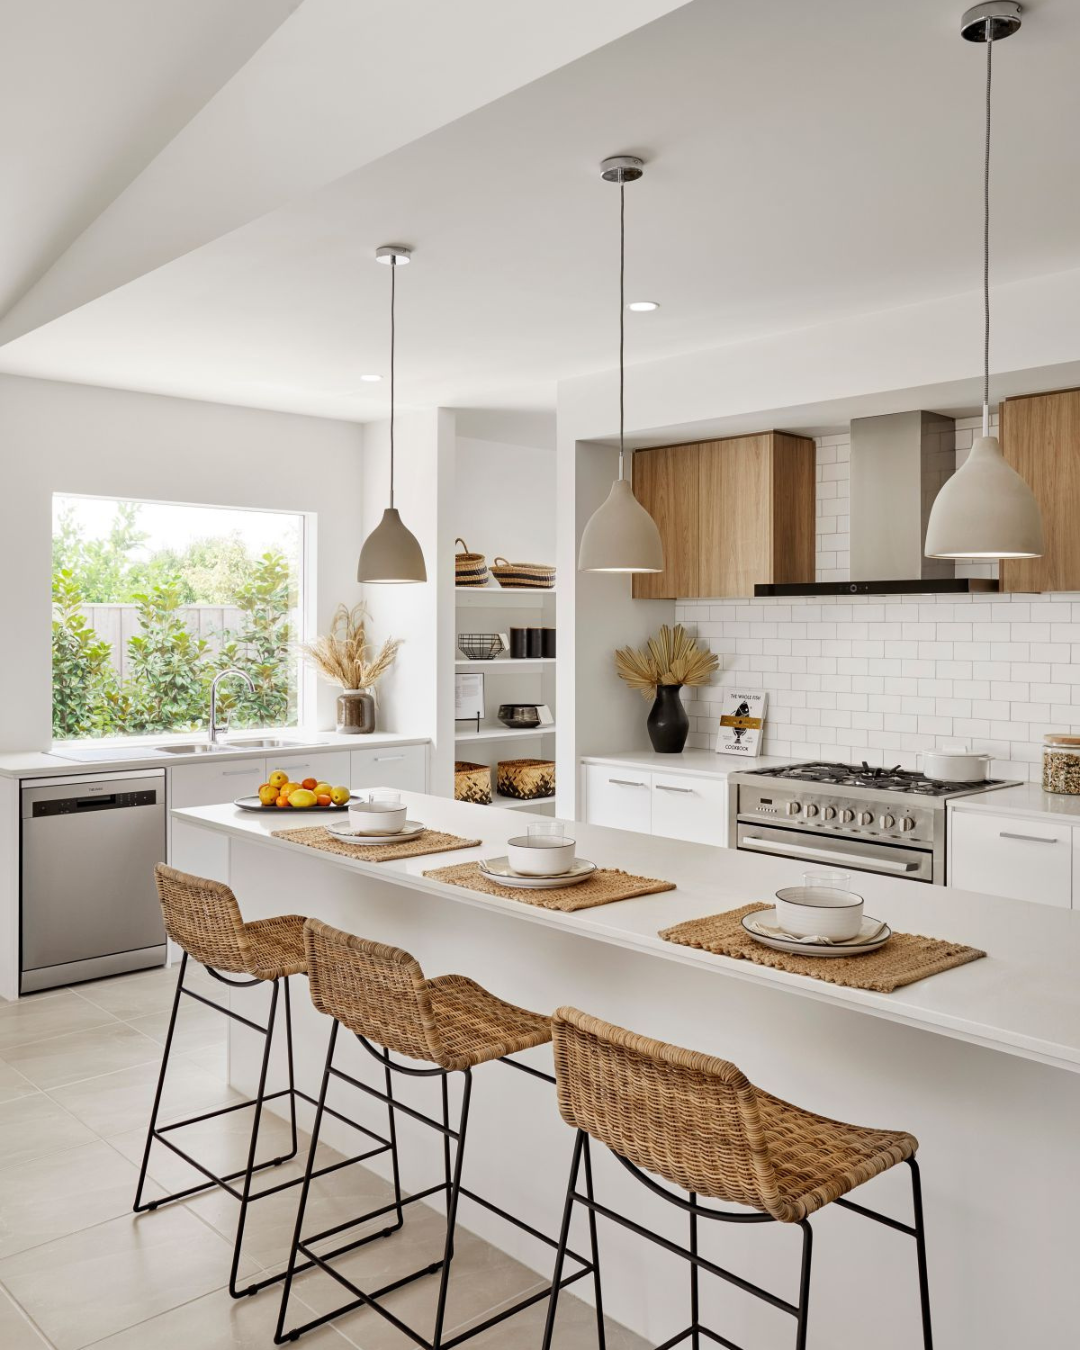 Kitchen Lighting: Everything You Need To Know